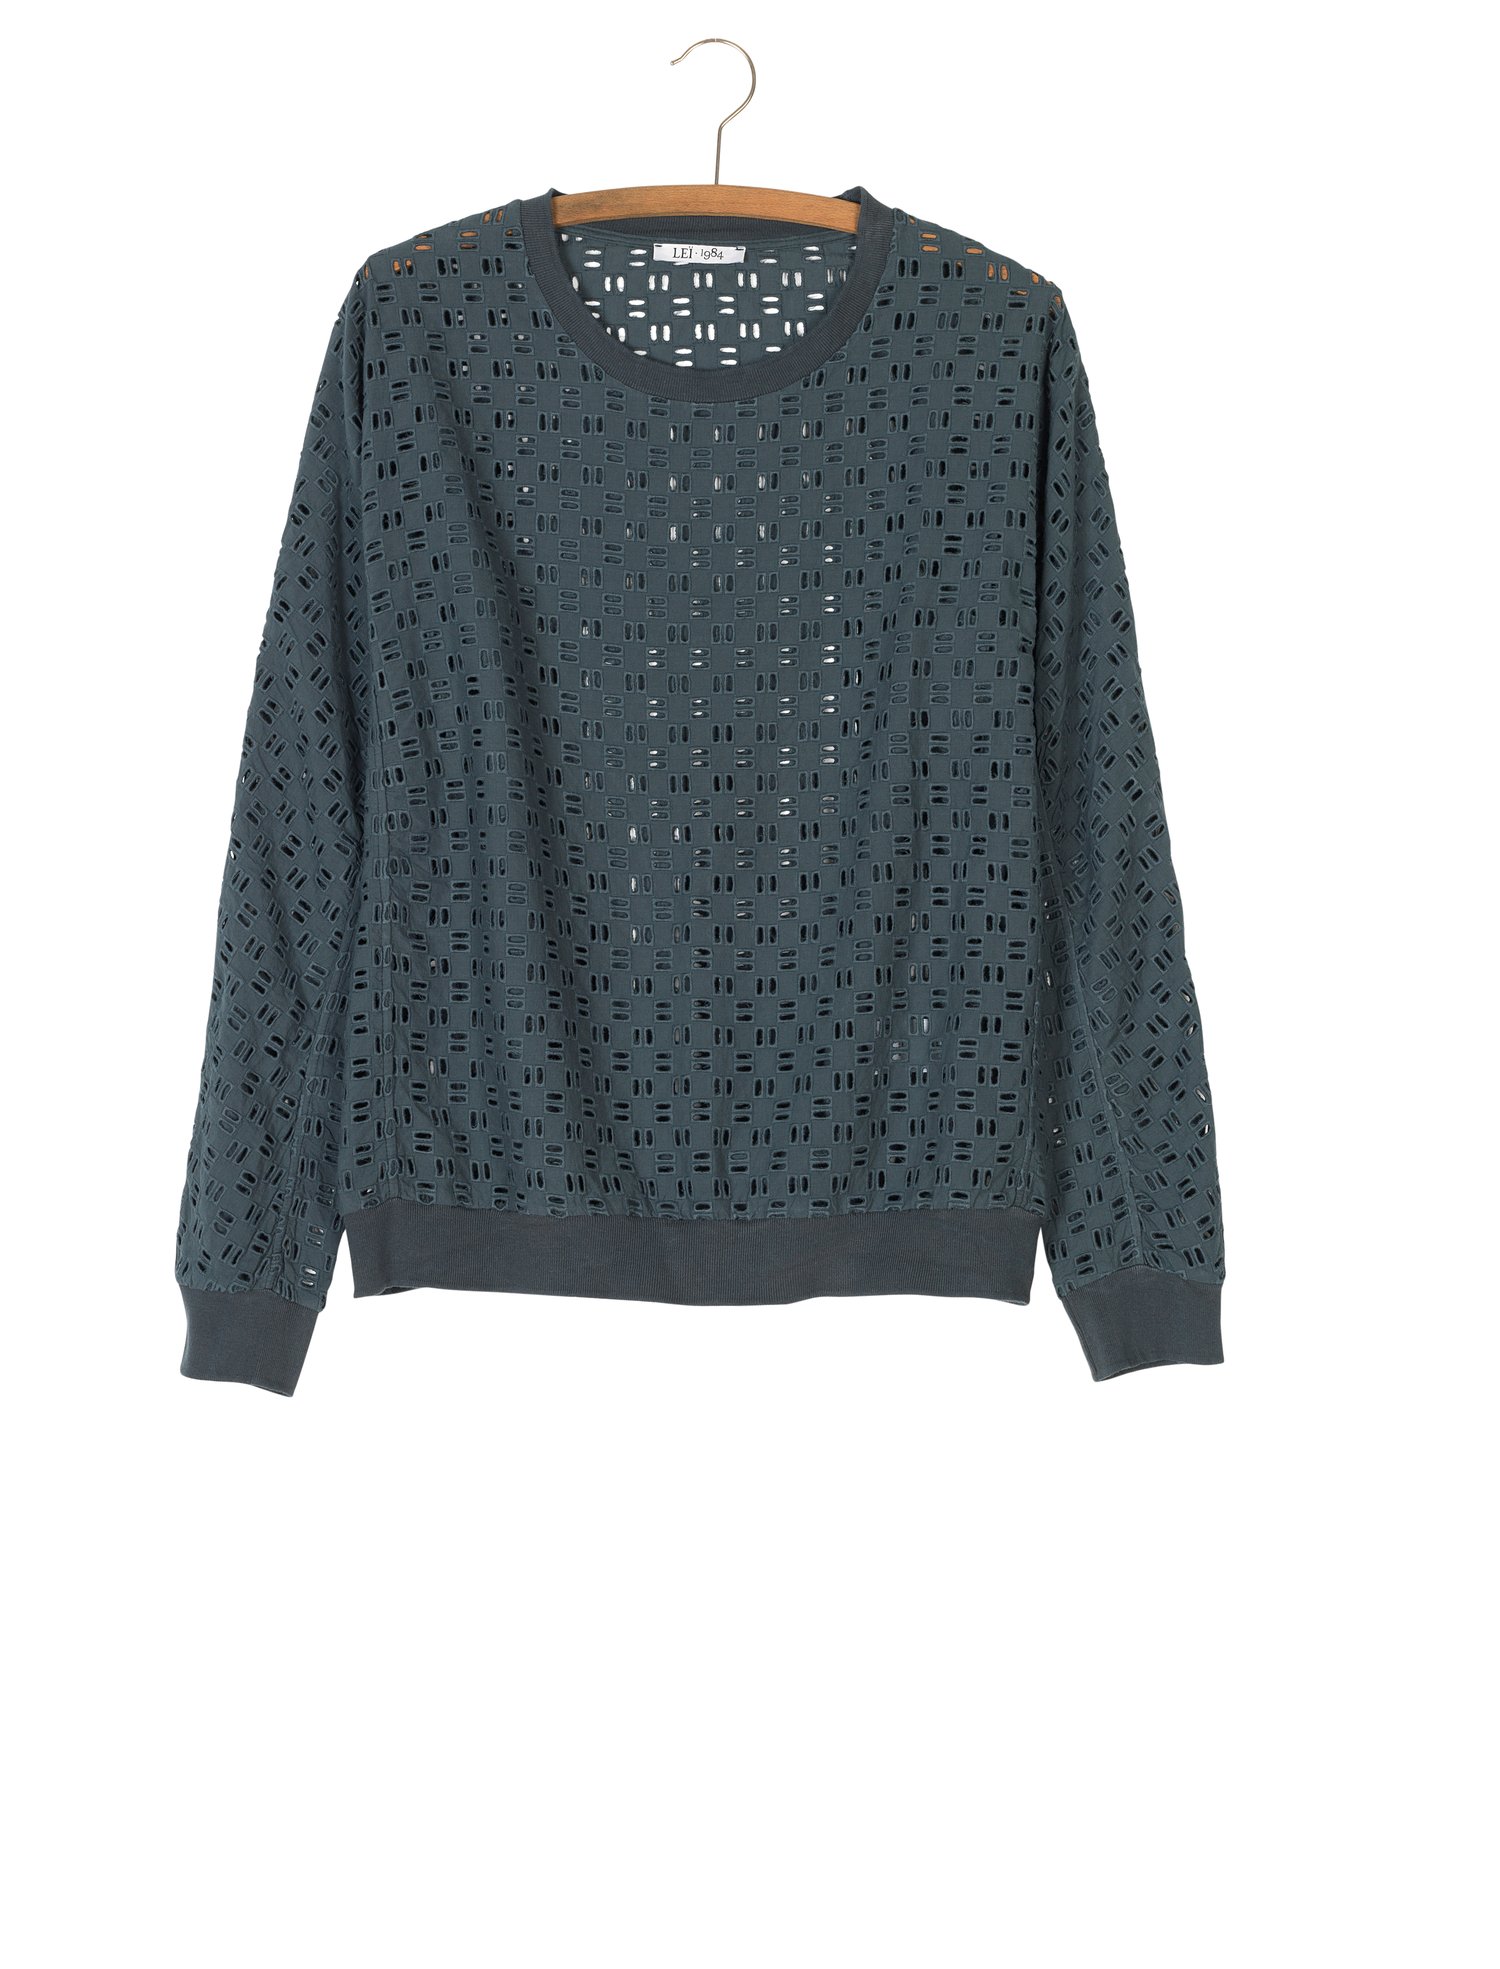 Image of Sweat broderie anglaise GLORIA 130€ - 60%